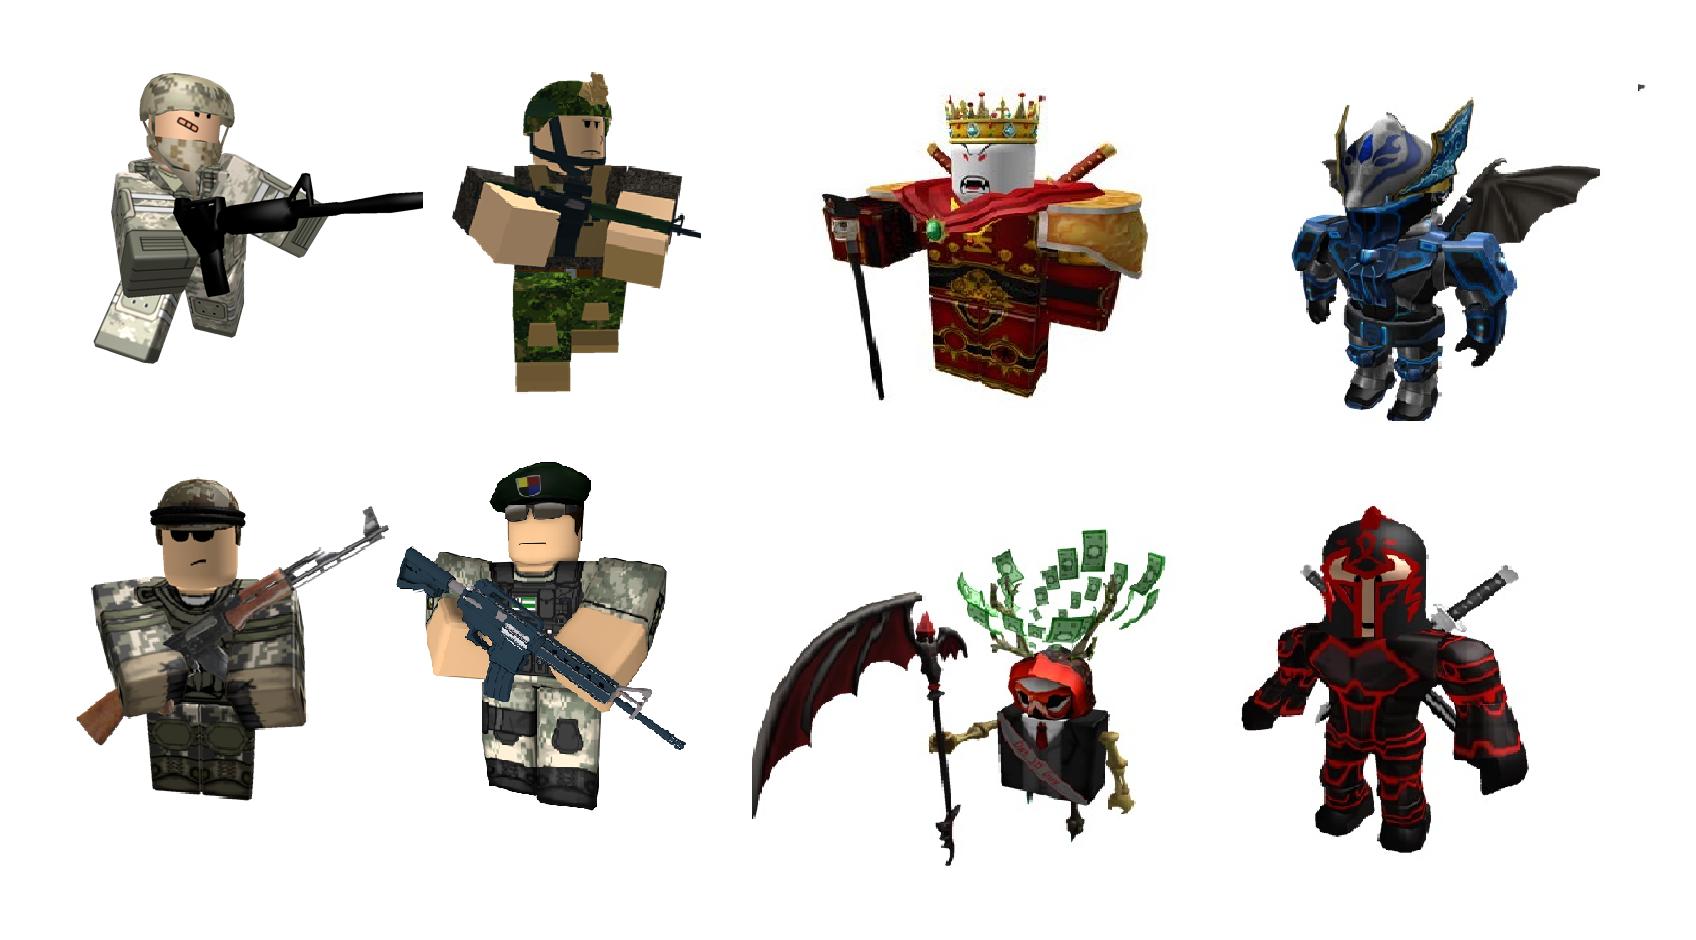 Wallpaper of Roblox Avatars Ideas for Android